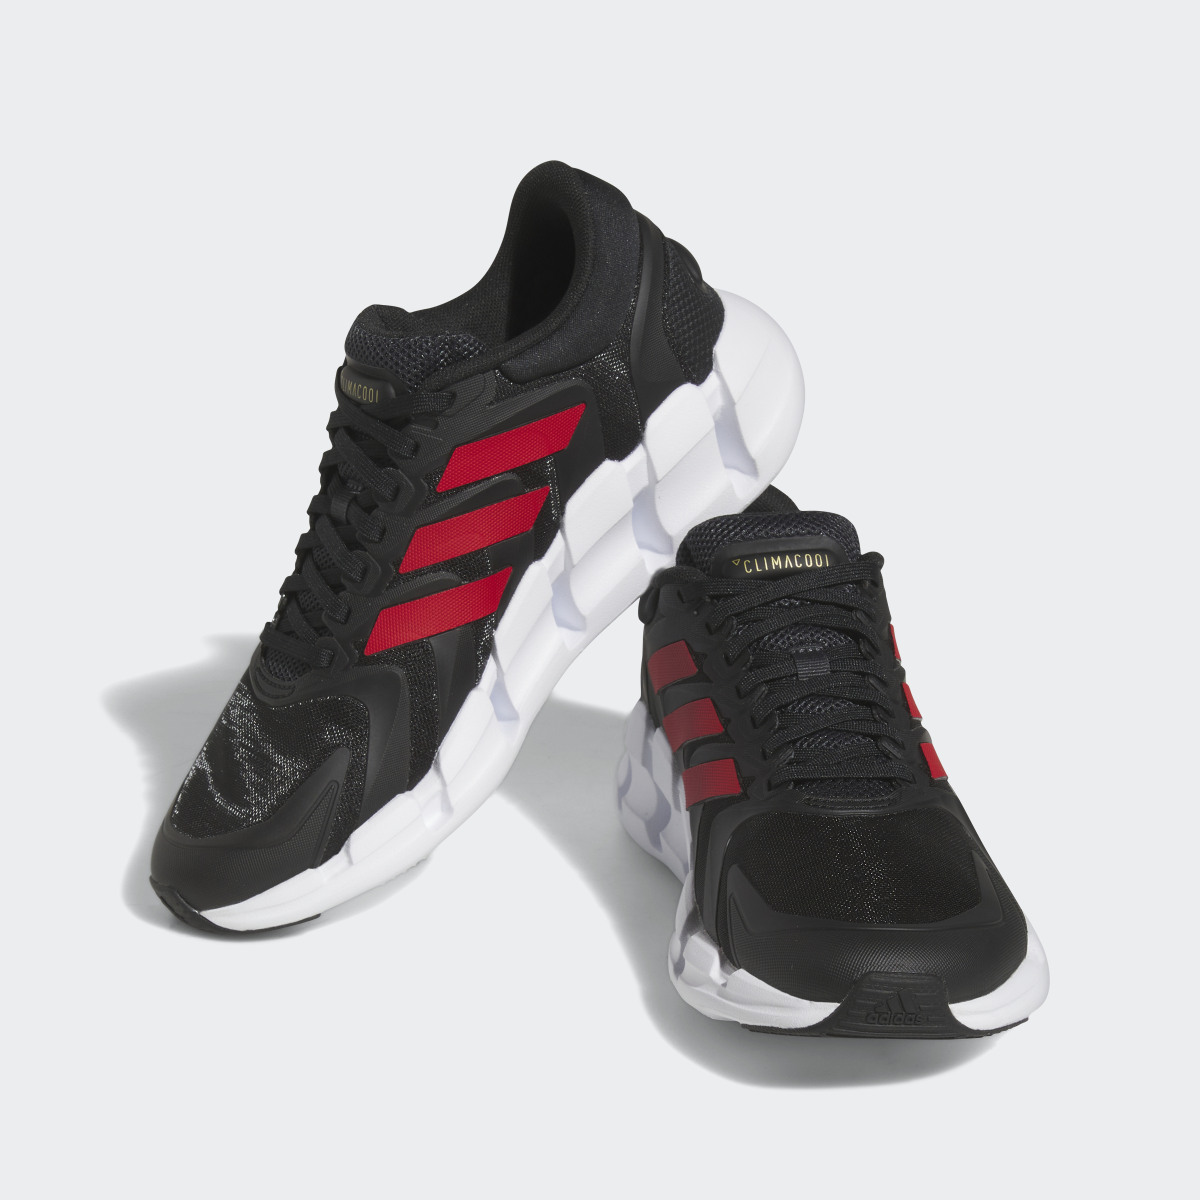 Adidas Chaussure Climacool Ventice. 5